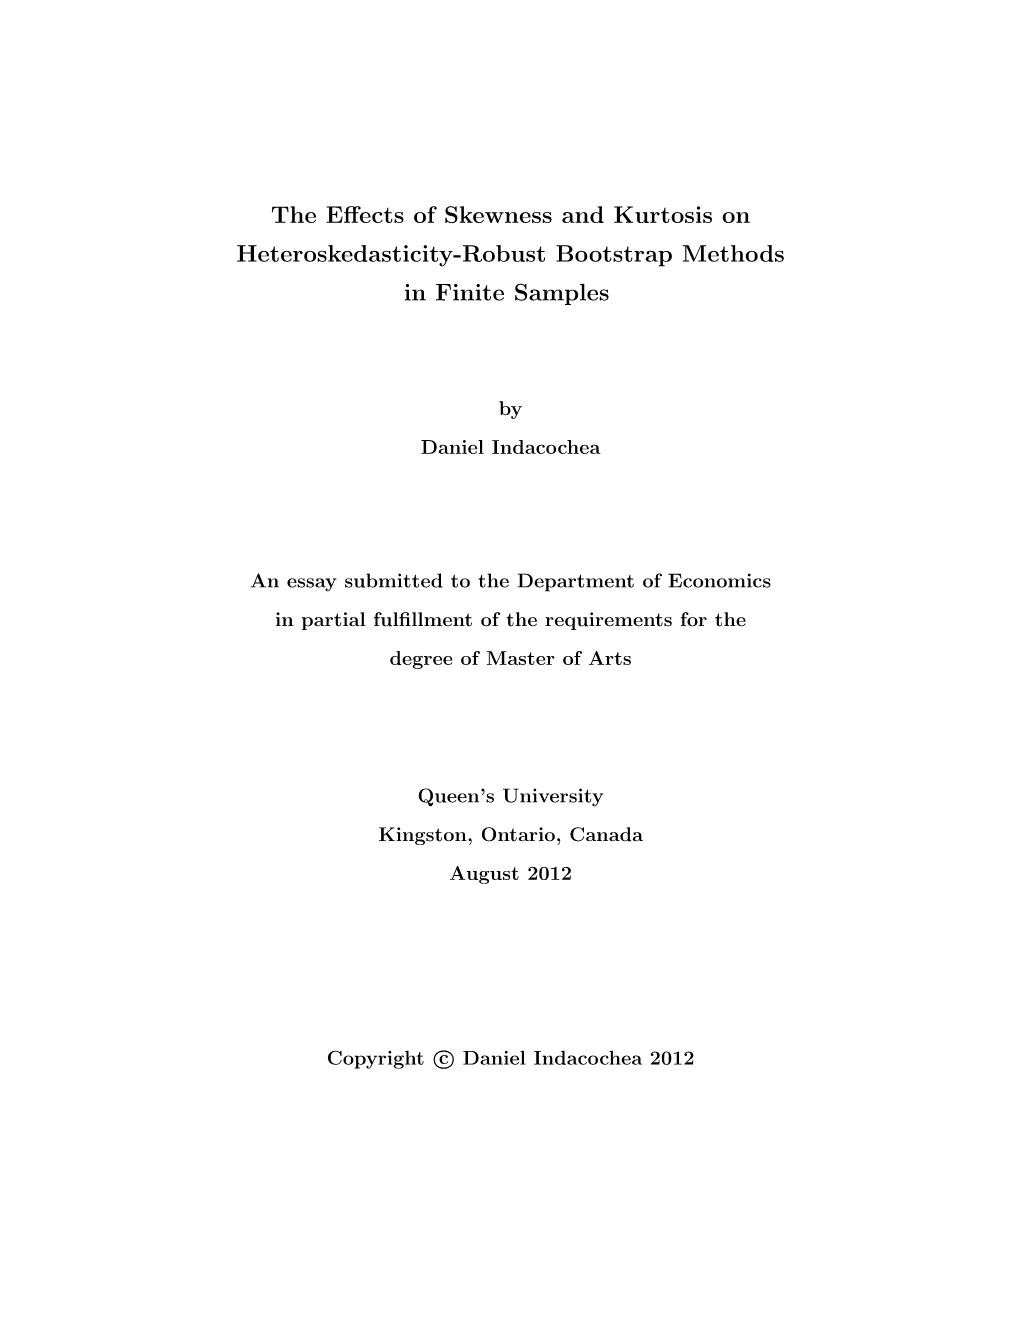 The Effects of Skewness and Kurtosis on Heteroskedasticity-Robust